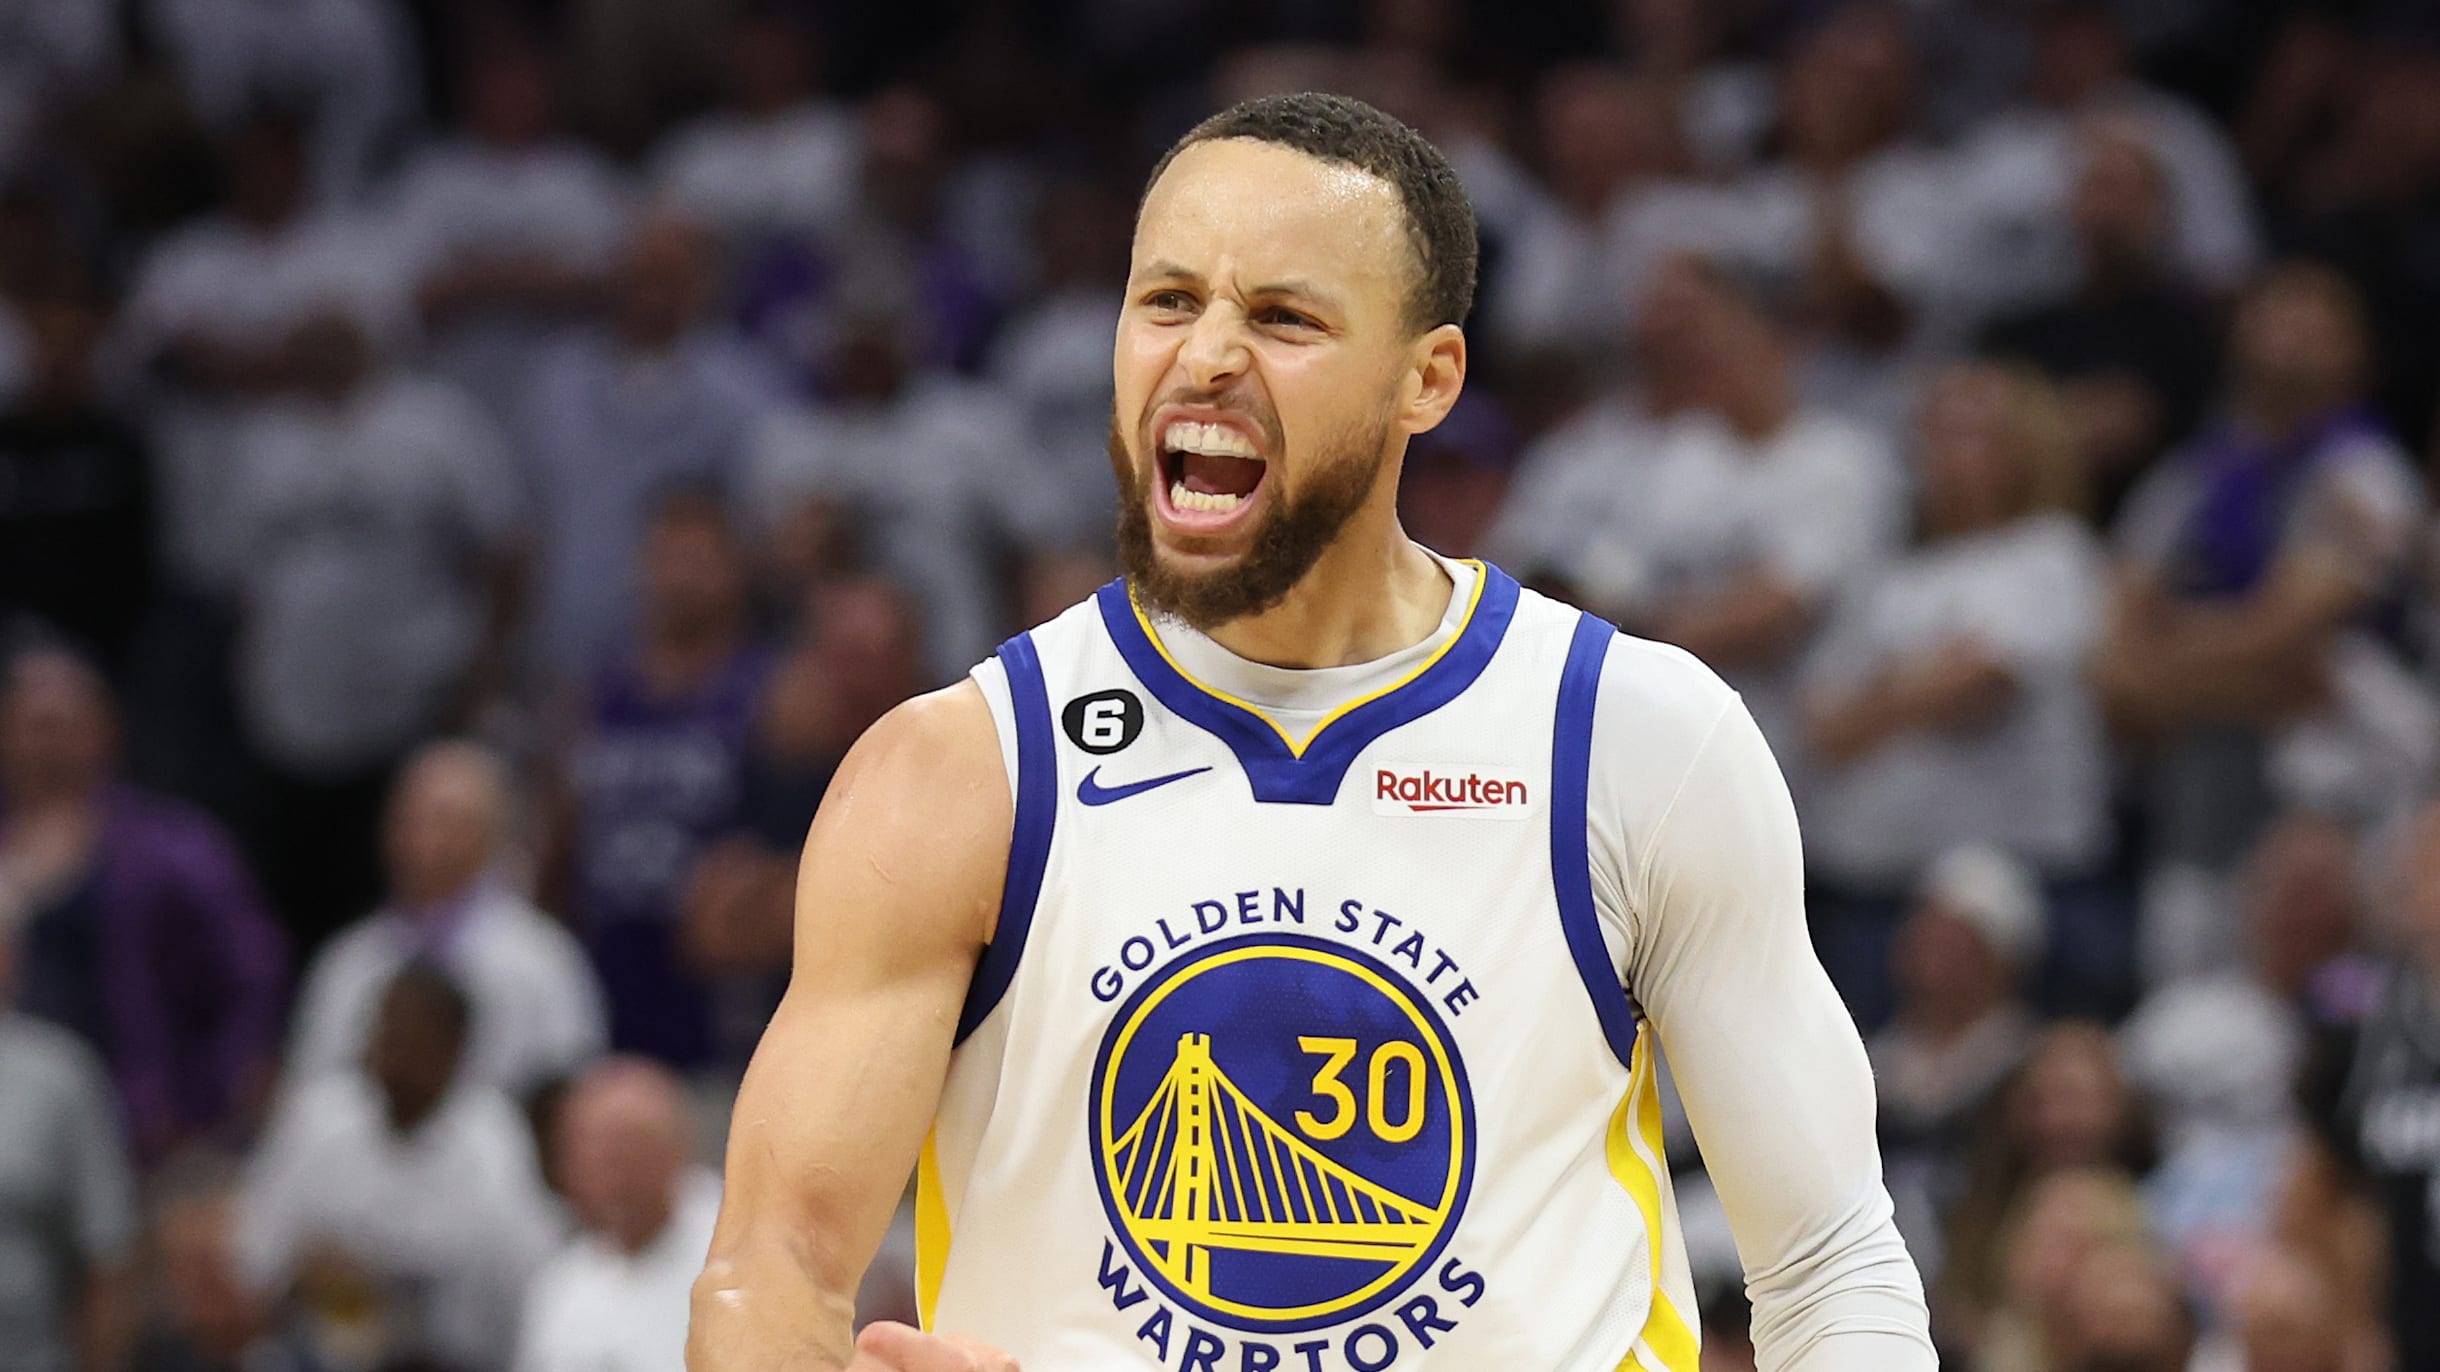 NBA Finals schedule 2022: Full dates, times, TV channels & live